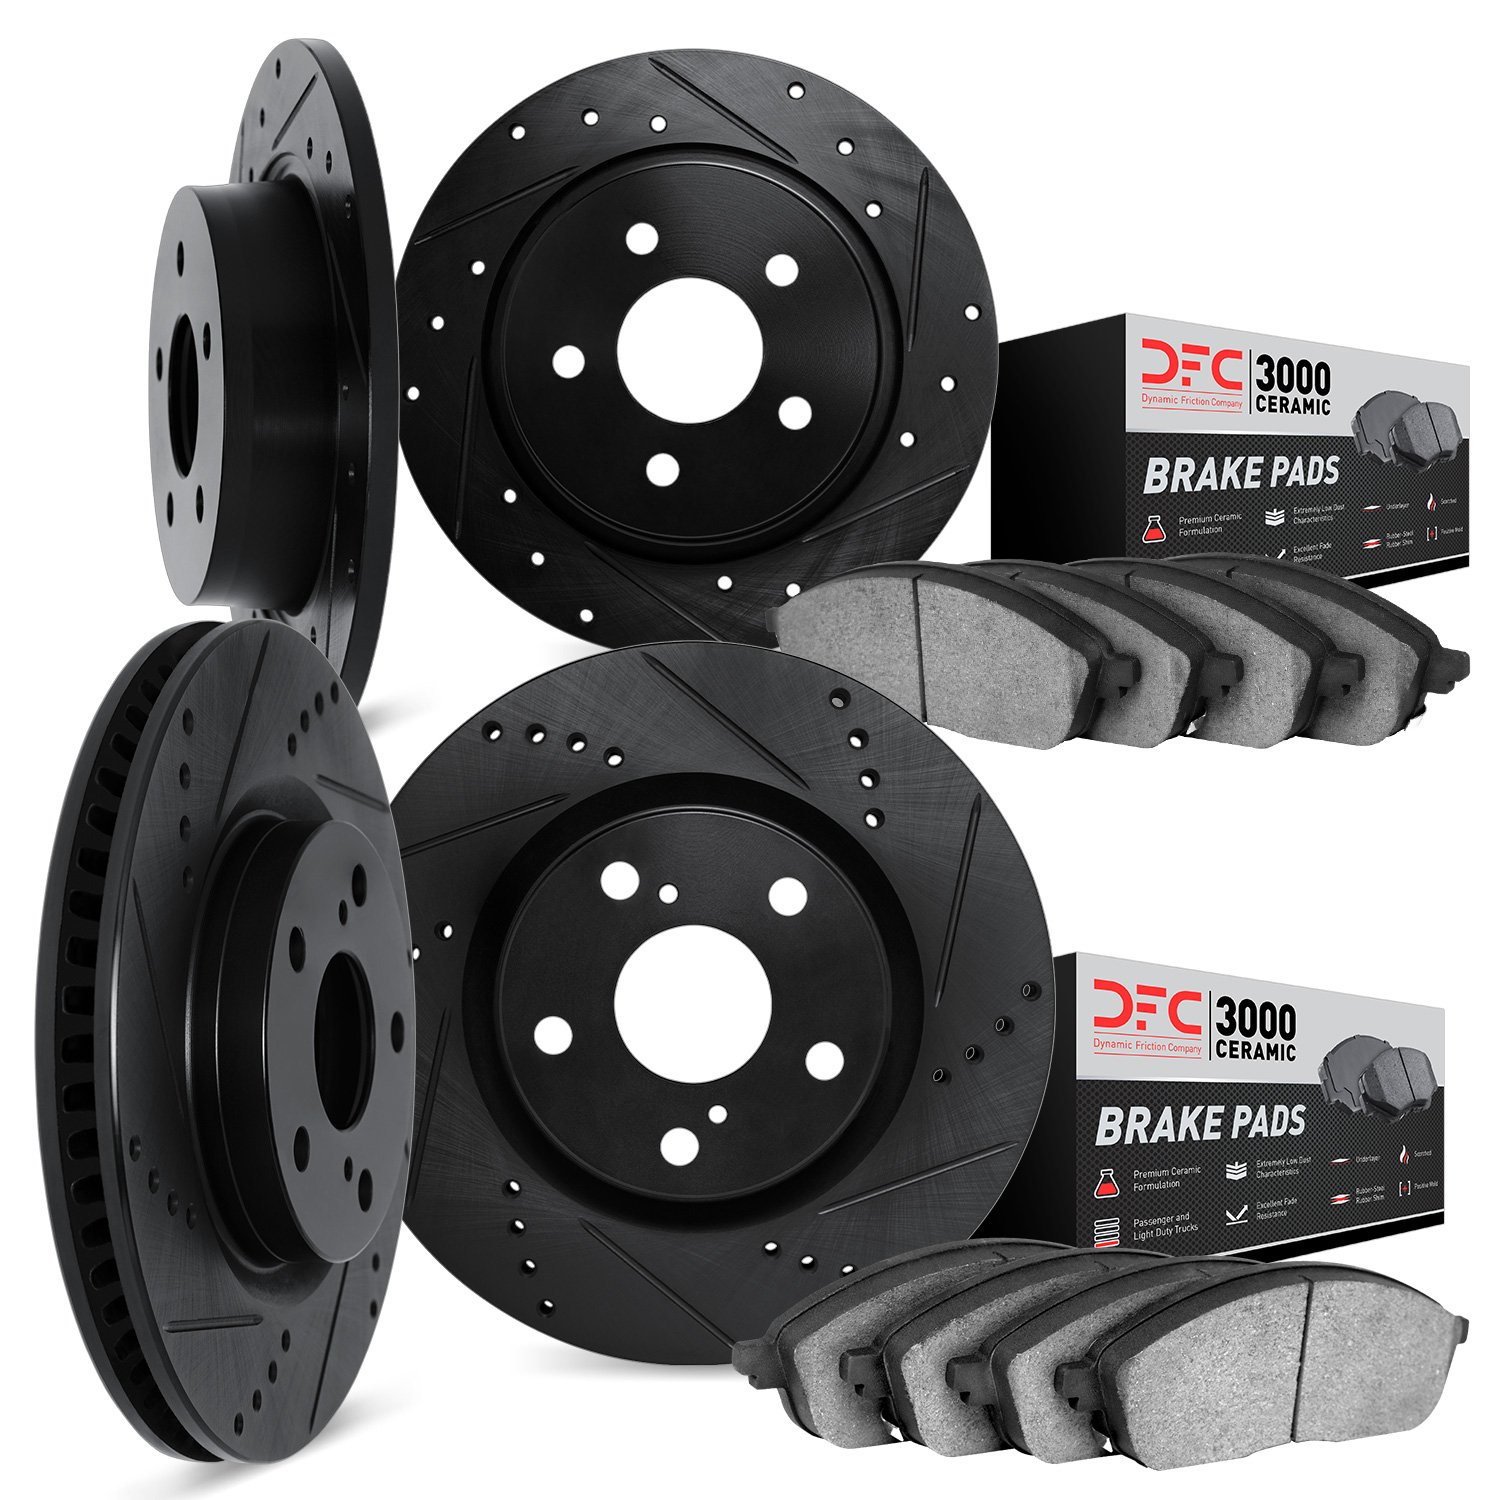 8304-31006 Drilled/Slotted Brake Rotors with 3000-Series Ceramic Brake Pads Kit [Black], 1982-1986 BMW, Position: Front and Rear